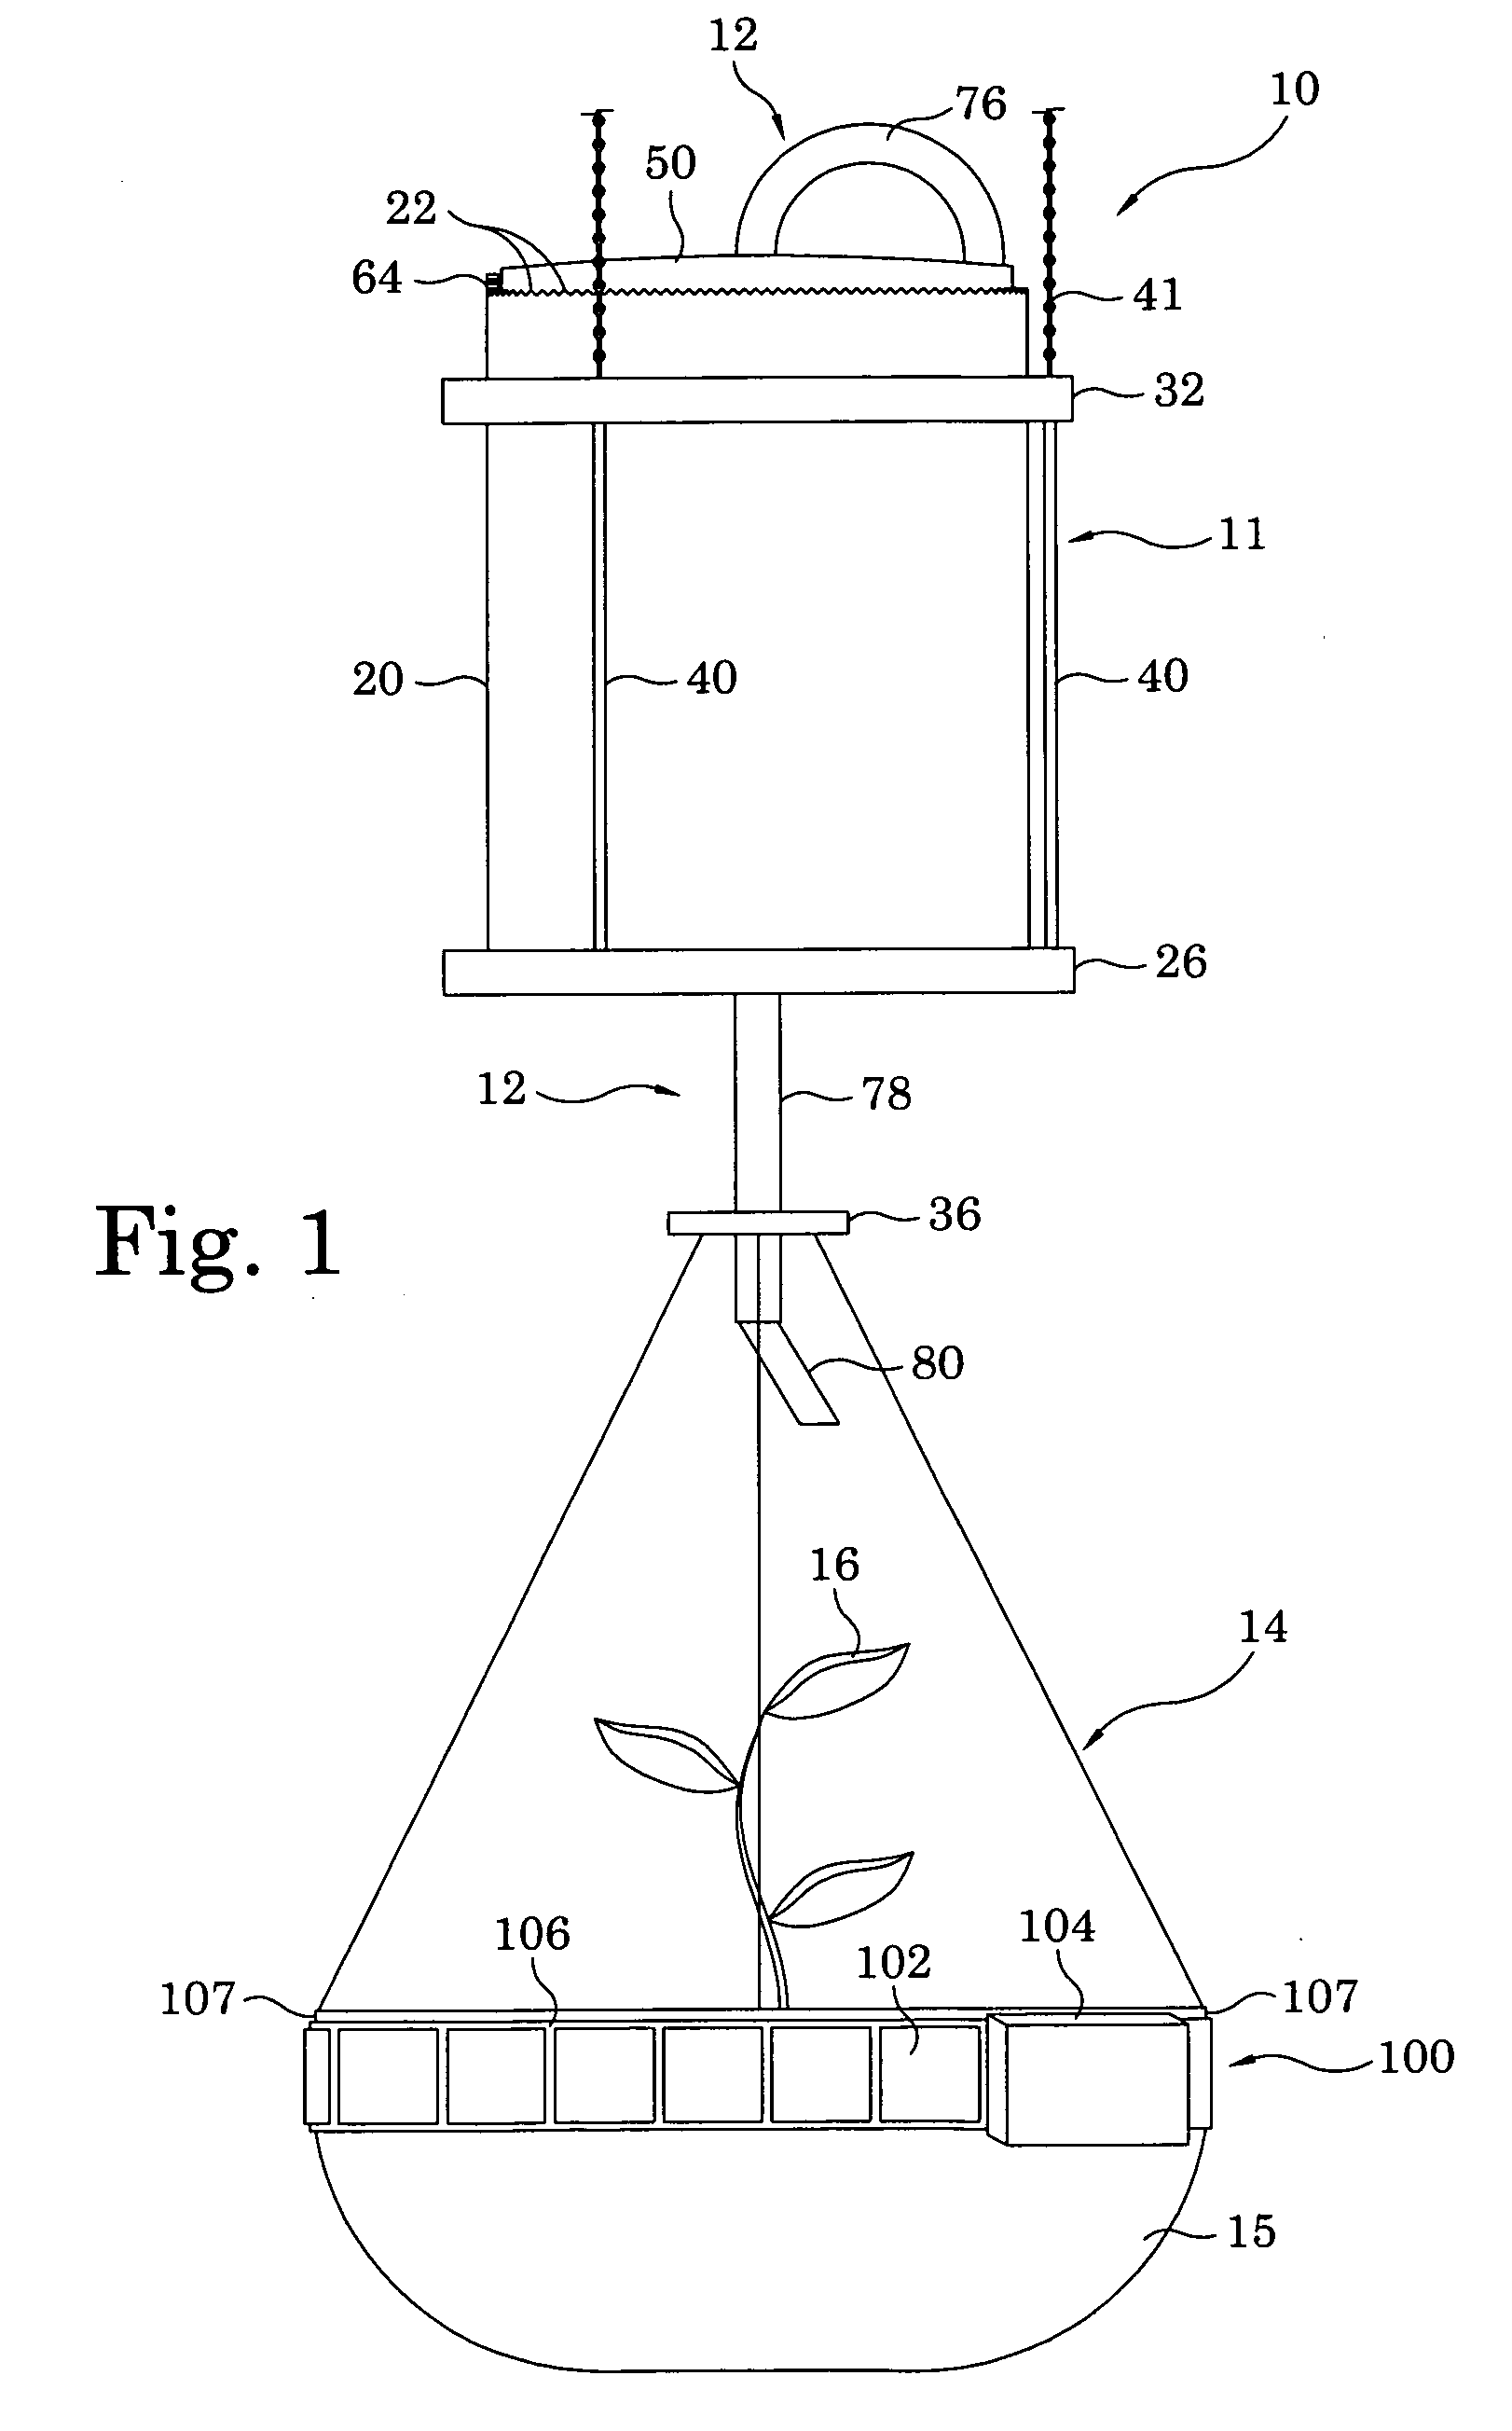 Self-contained apparatuses for hanging, holding, rotating, or watering plants using solar power for plant maintenance